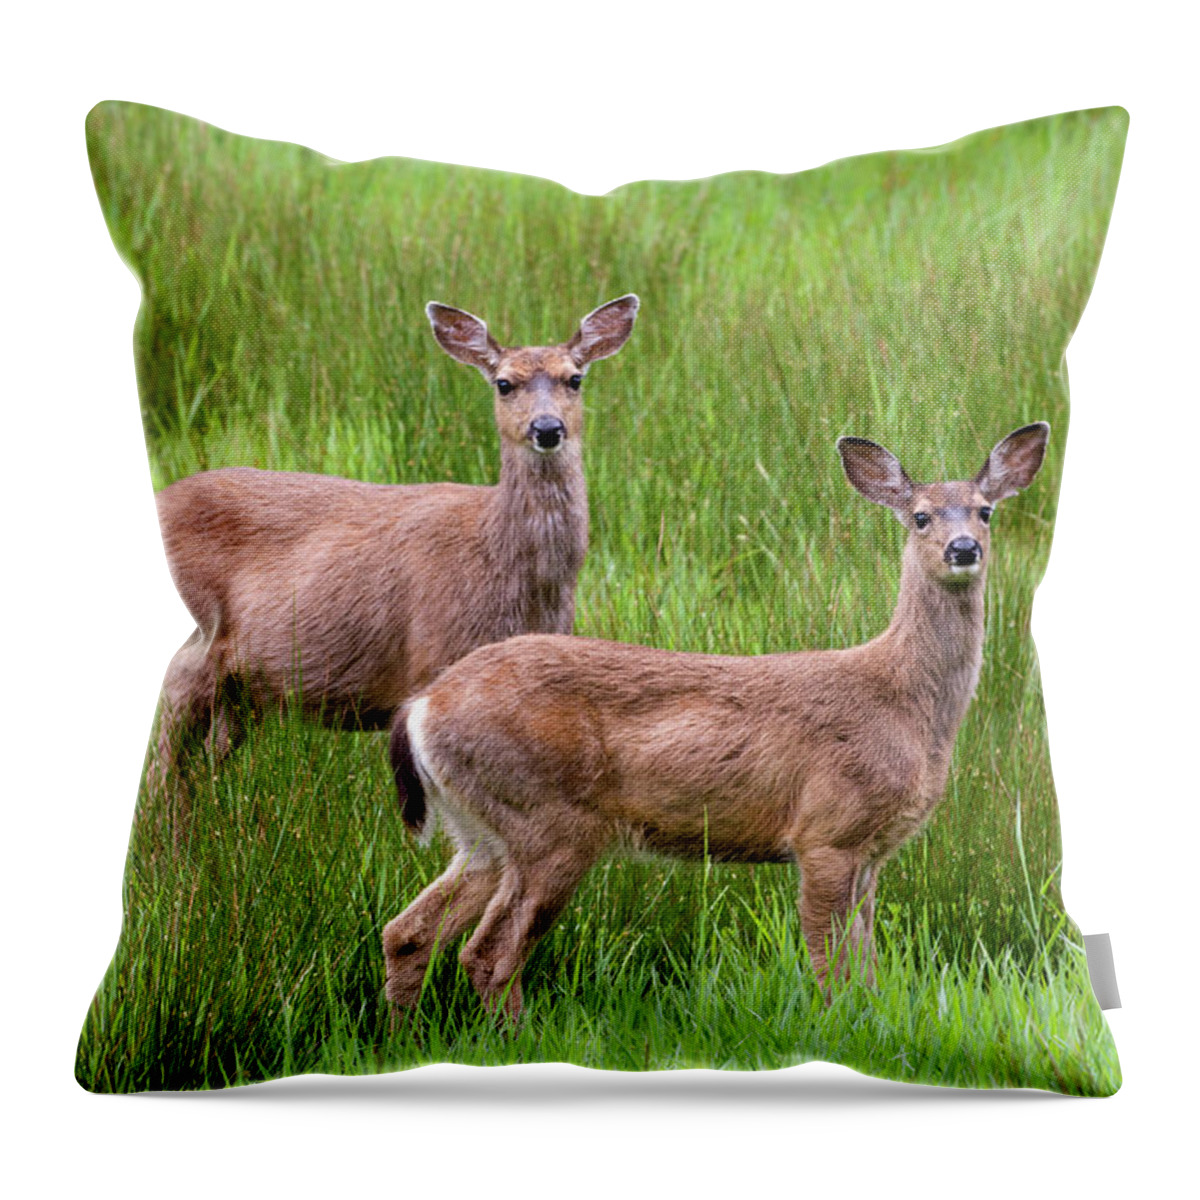 Animal Throw Pillow featuring the photograph Two Blacktail Does - Western Oregon by Randall Ingalls